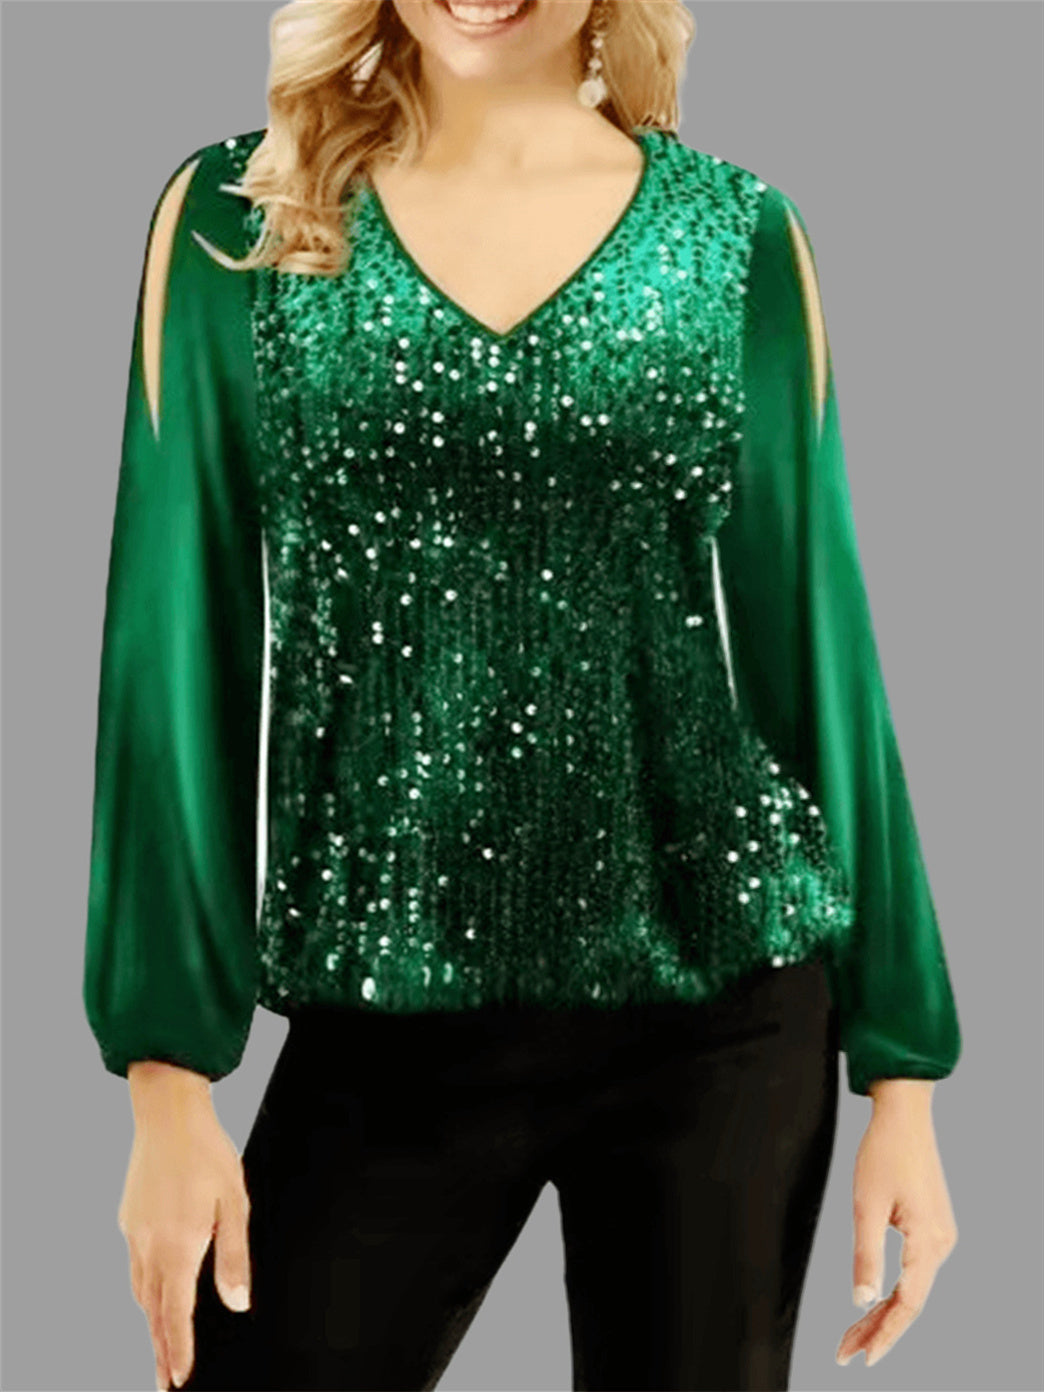 Women's Stitching Sequin Pattern Solid Color V-Neck Long Sleeve Top